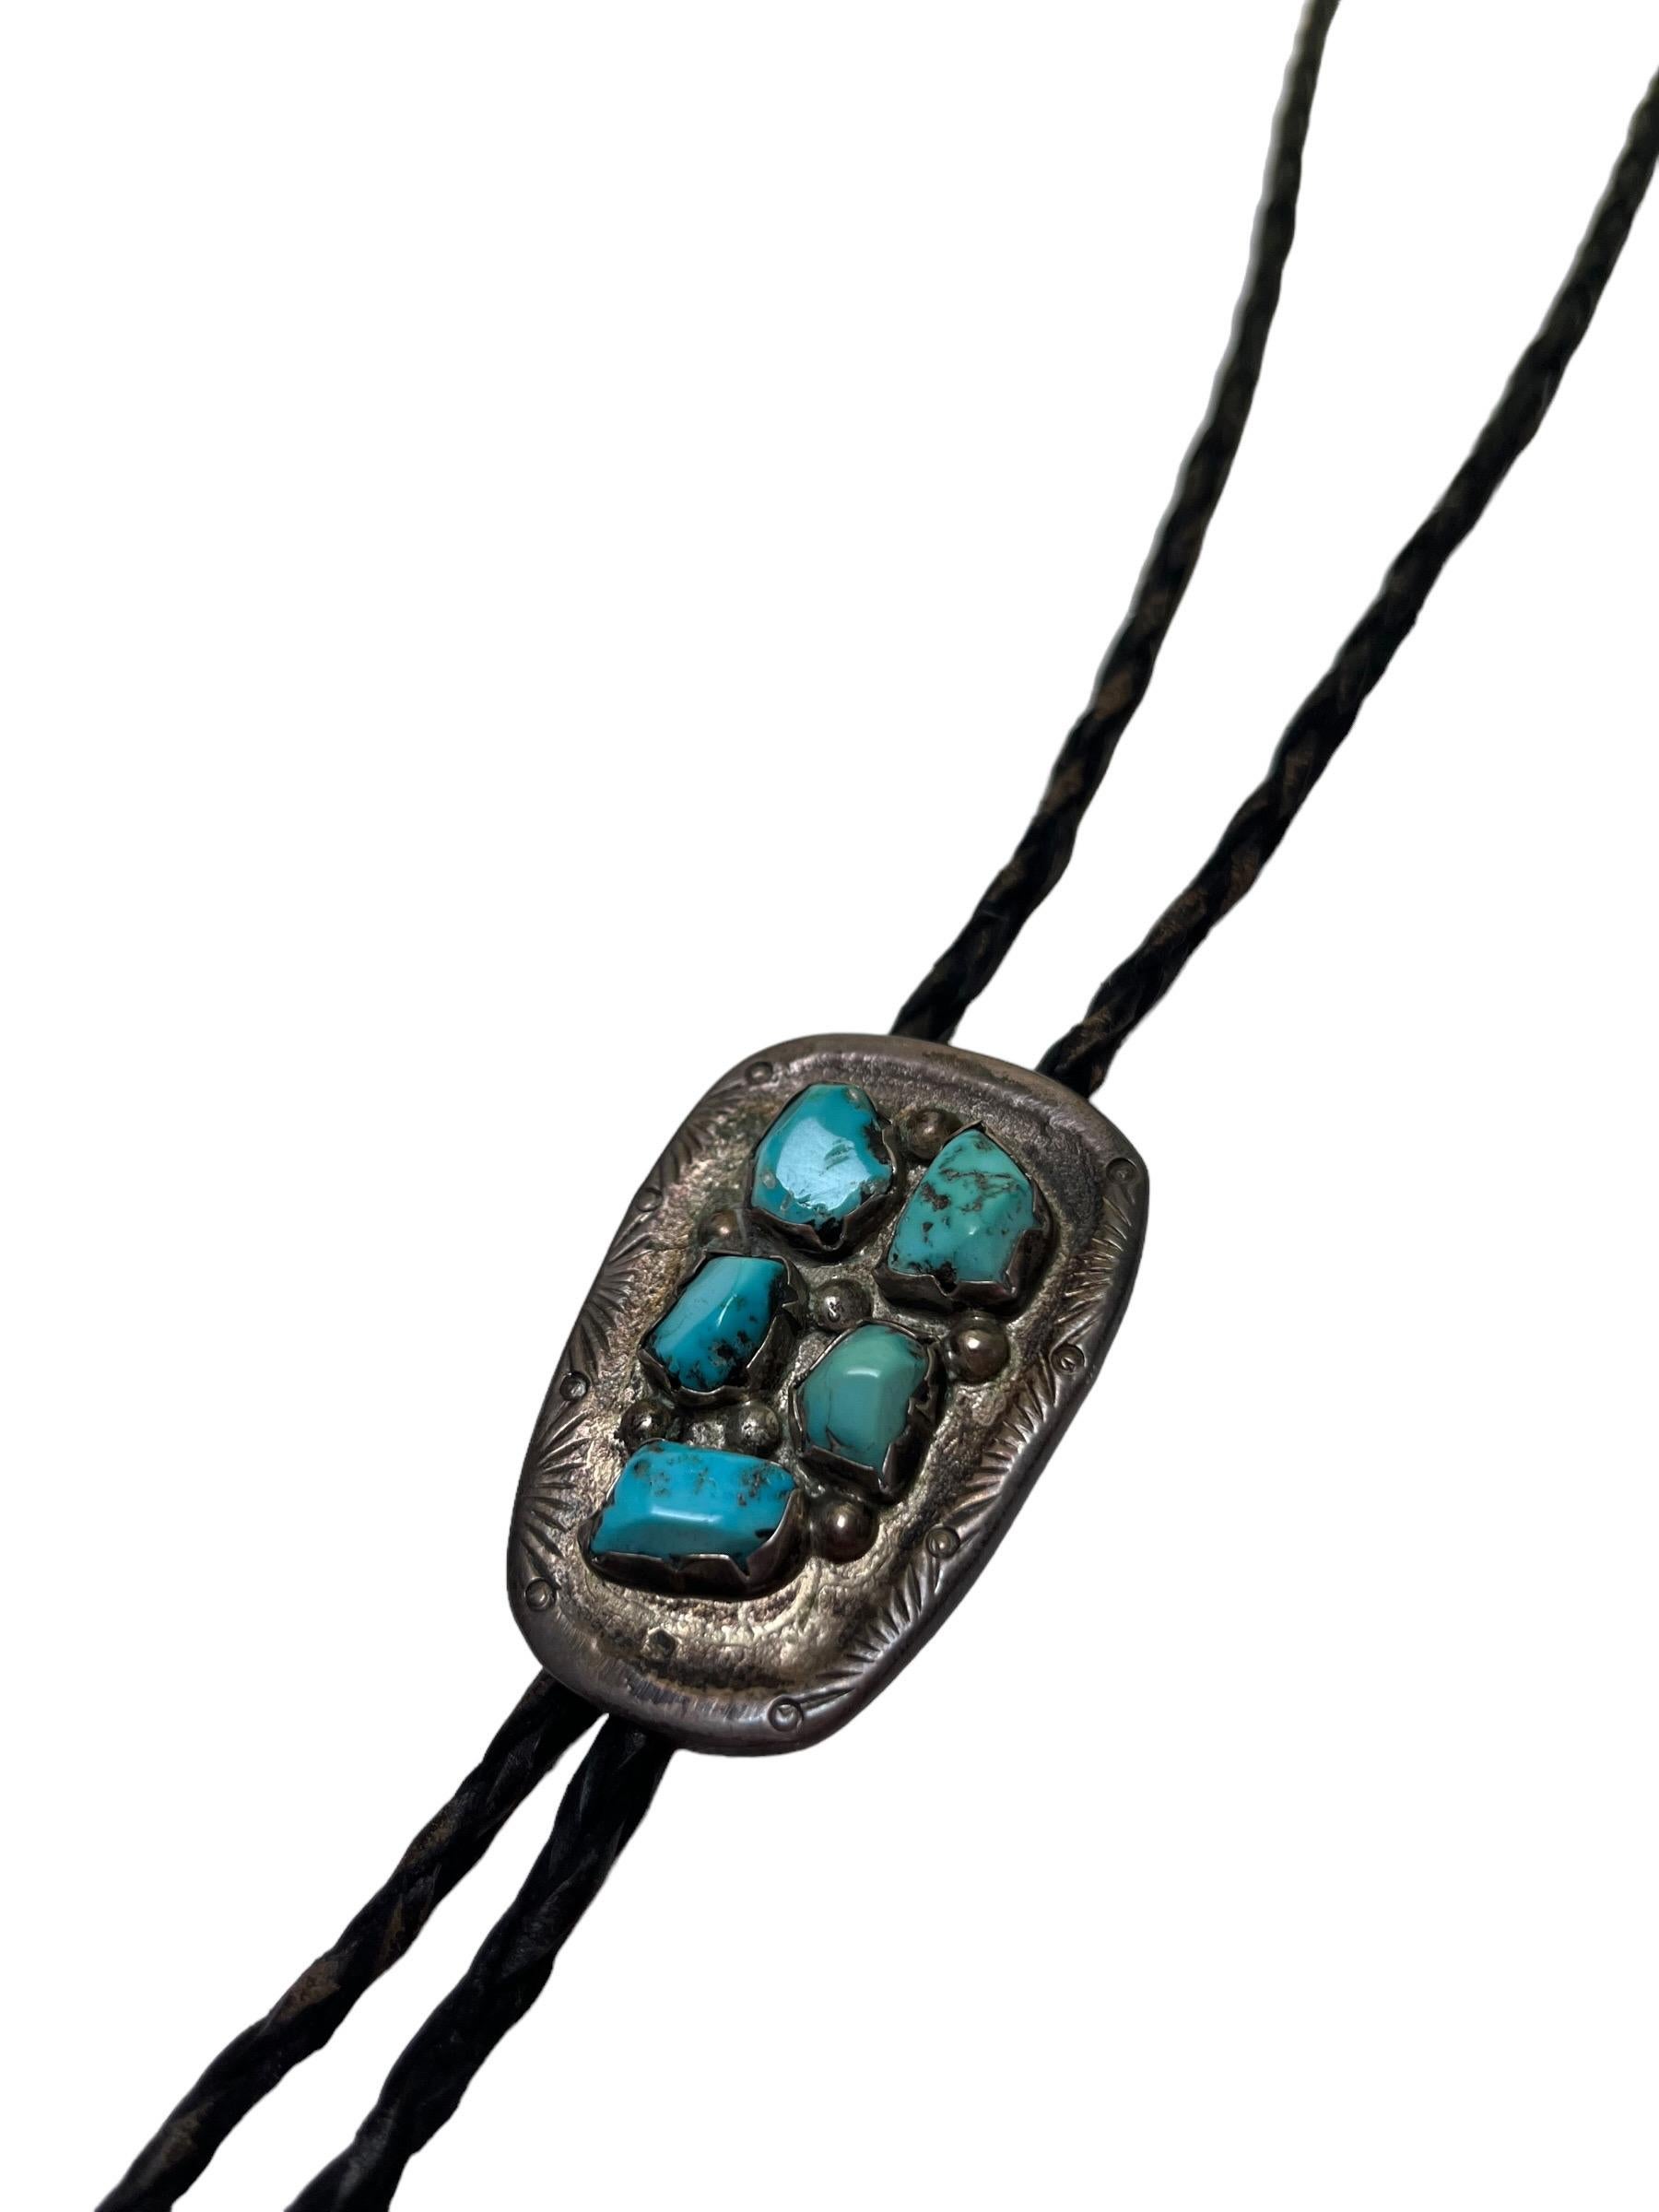 Vintage 1960s Native American Navajo Turquoise, Silver. & Leather Bolo Tie

This gorgeous peice features five beautiful turquoise nuggets in varying shades which are inlaid atop a stamped silver medallion. The piece is unmarked aside from the